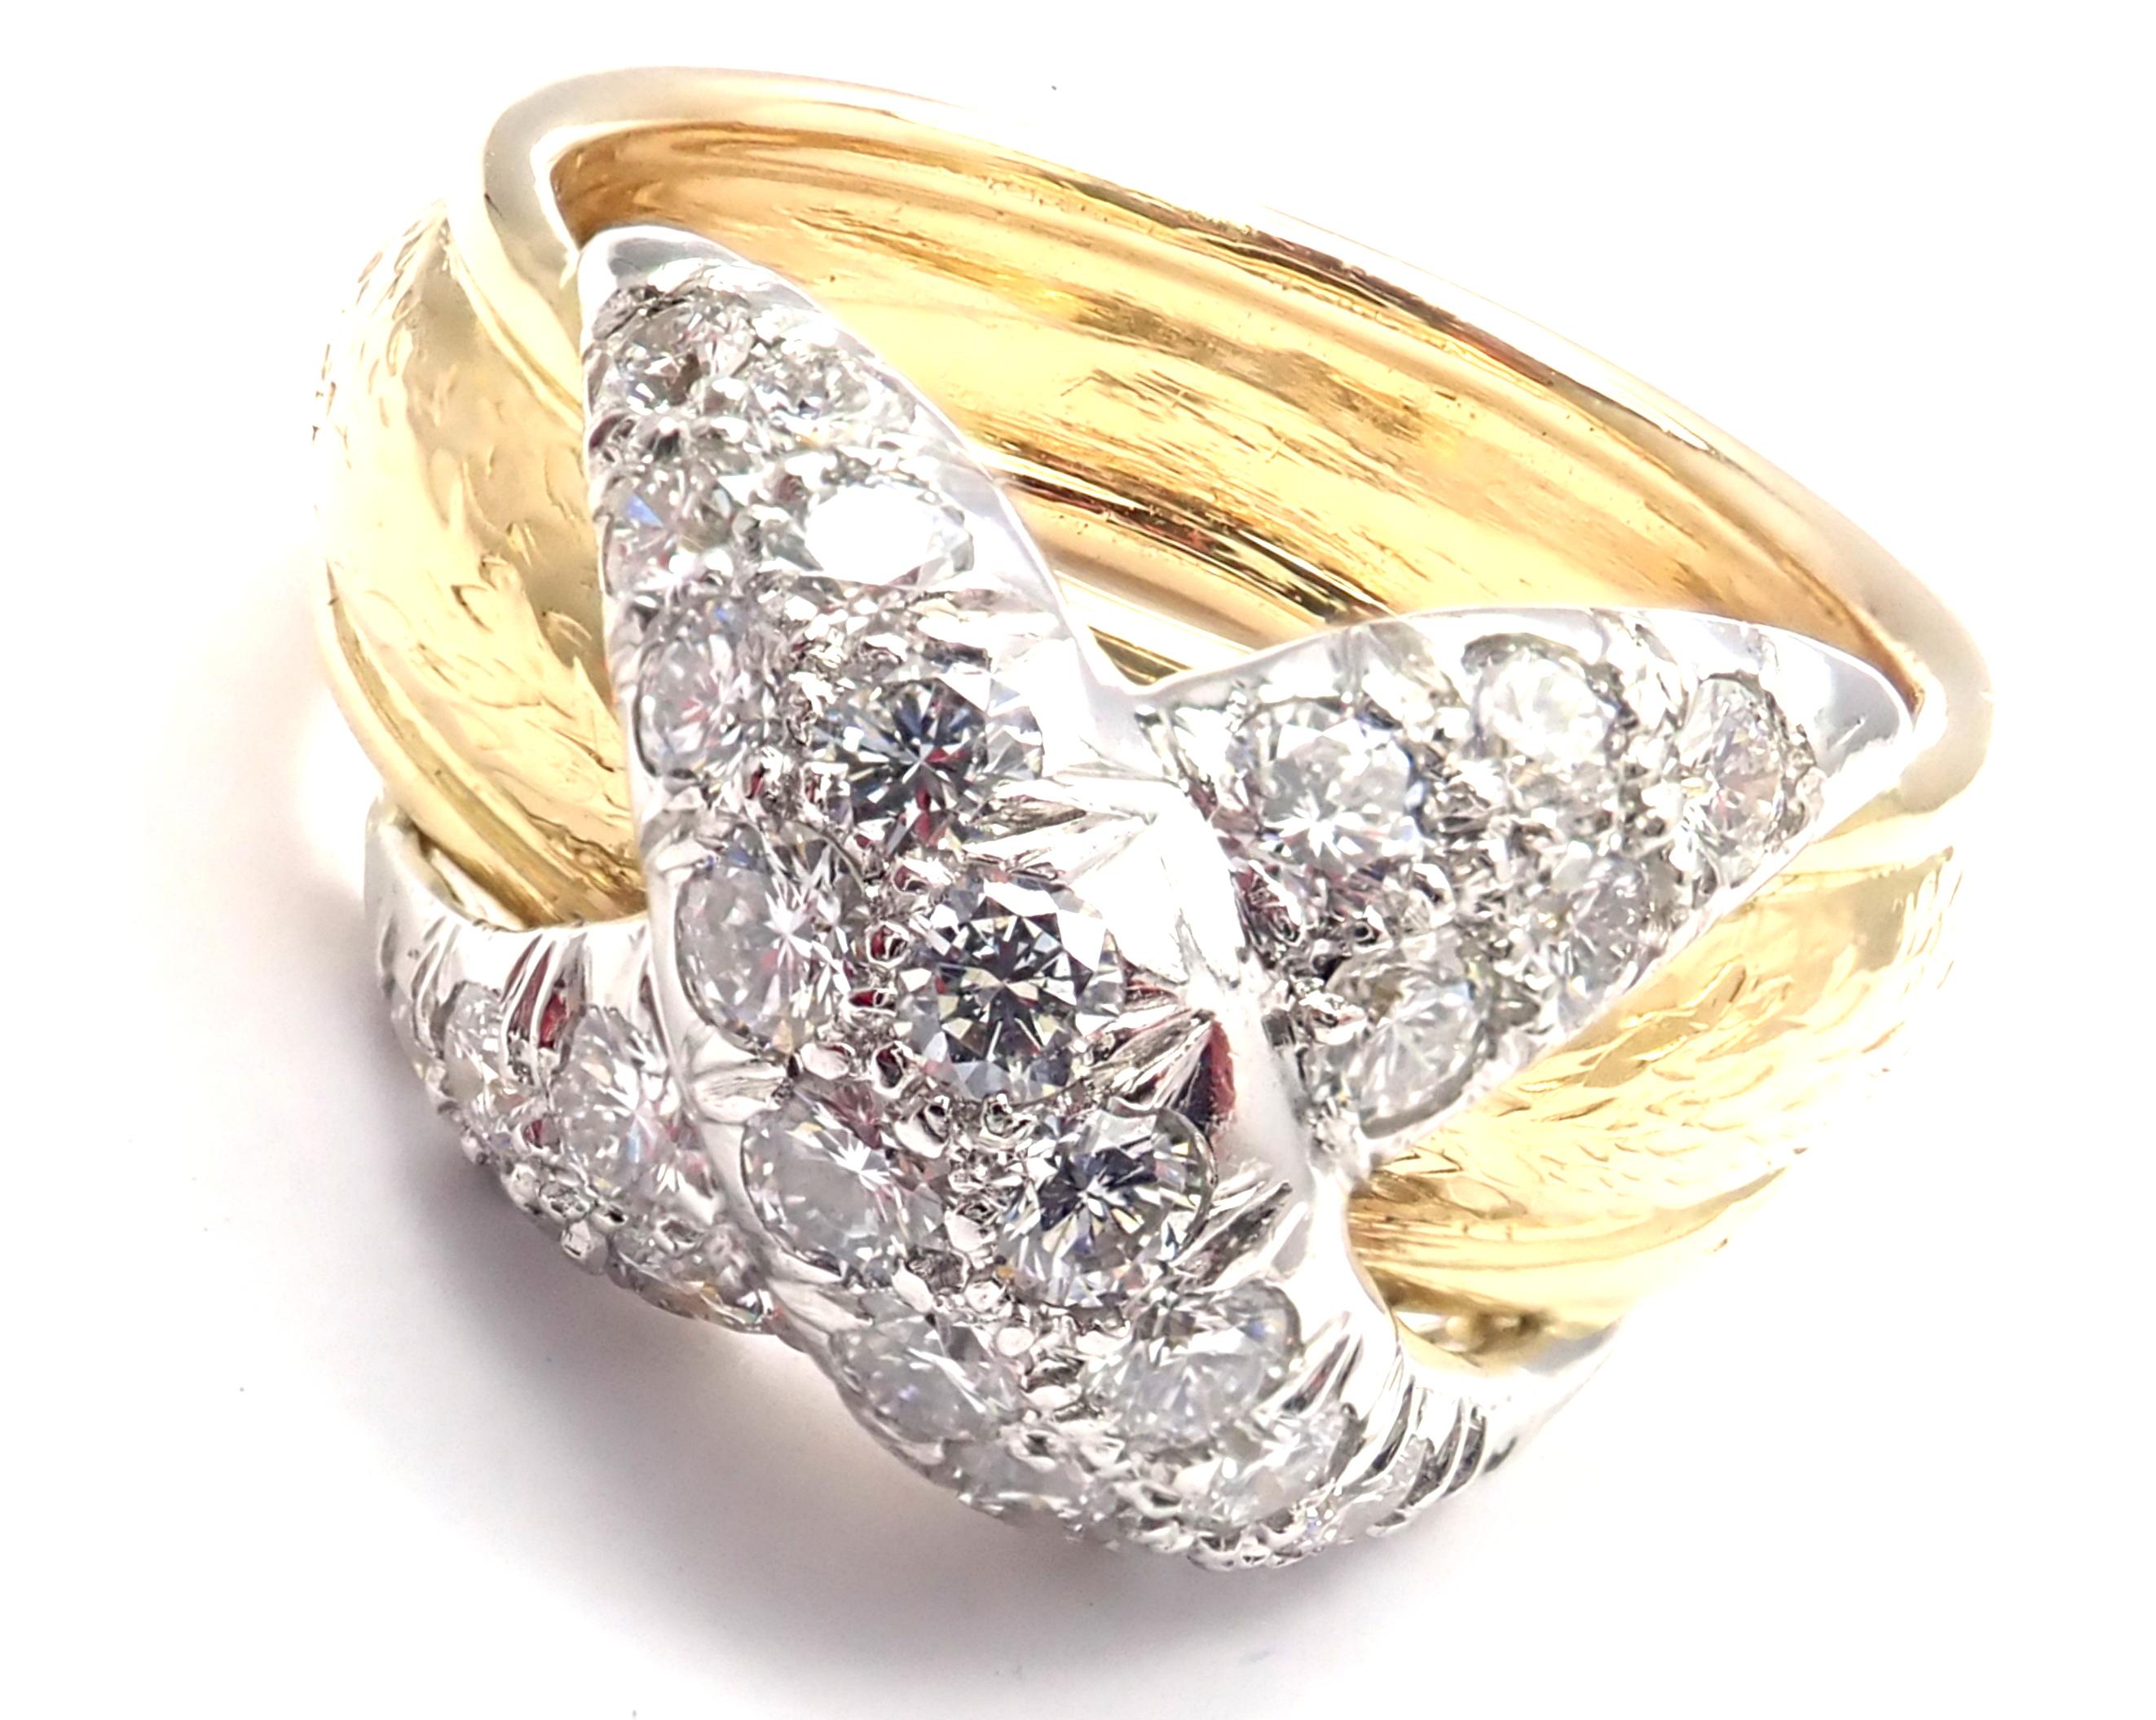 18k Yellow Gold Diamond X Band Ring by Jean Schlumberger for Tiffany & Co. 
With 28 Round Brilliant Cut Diamonds VS1 clarity, G color, 
Total weight Approx 1ct
Details:
Ring Size: 5.5
Weight: 9.5 grams
Width: 11.5mm
Stamped Hallmarks: Tiffany & Co